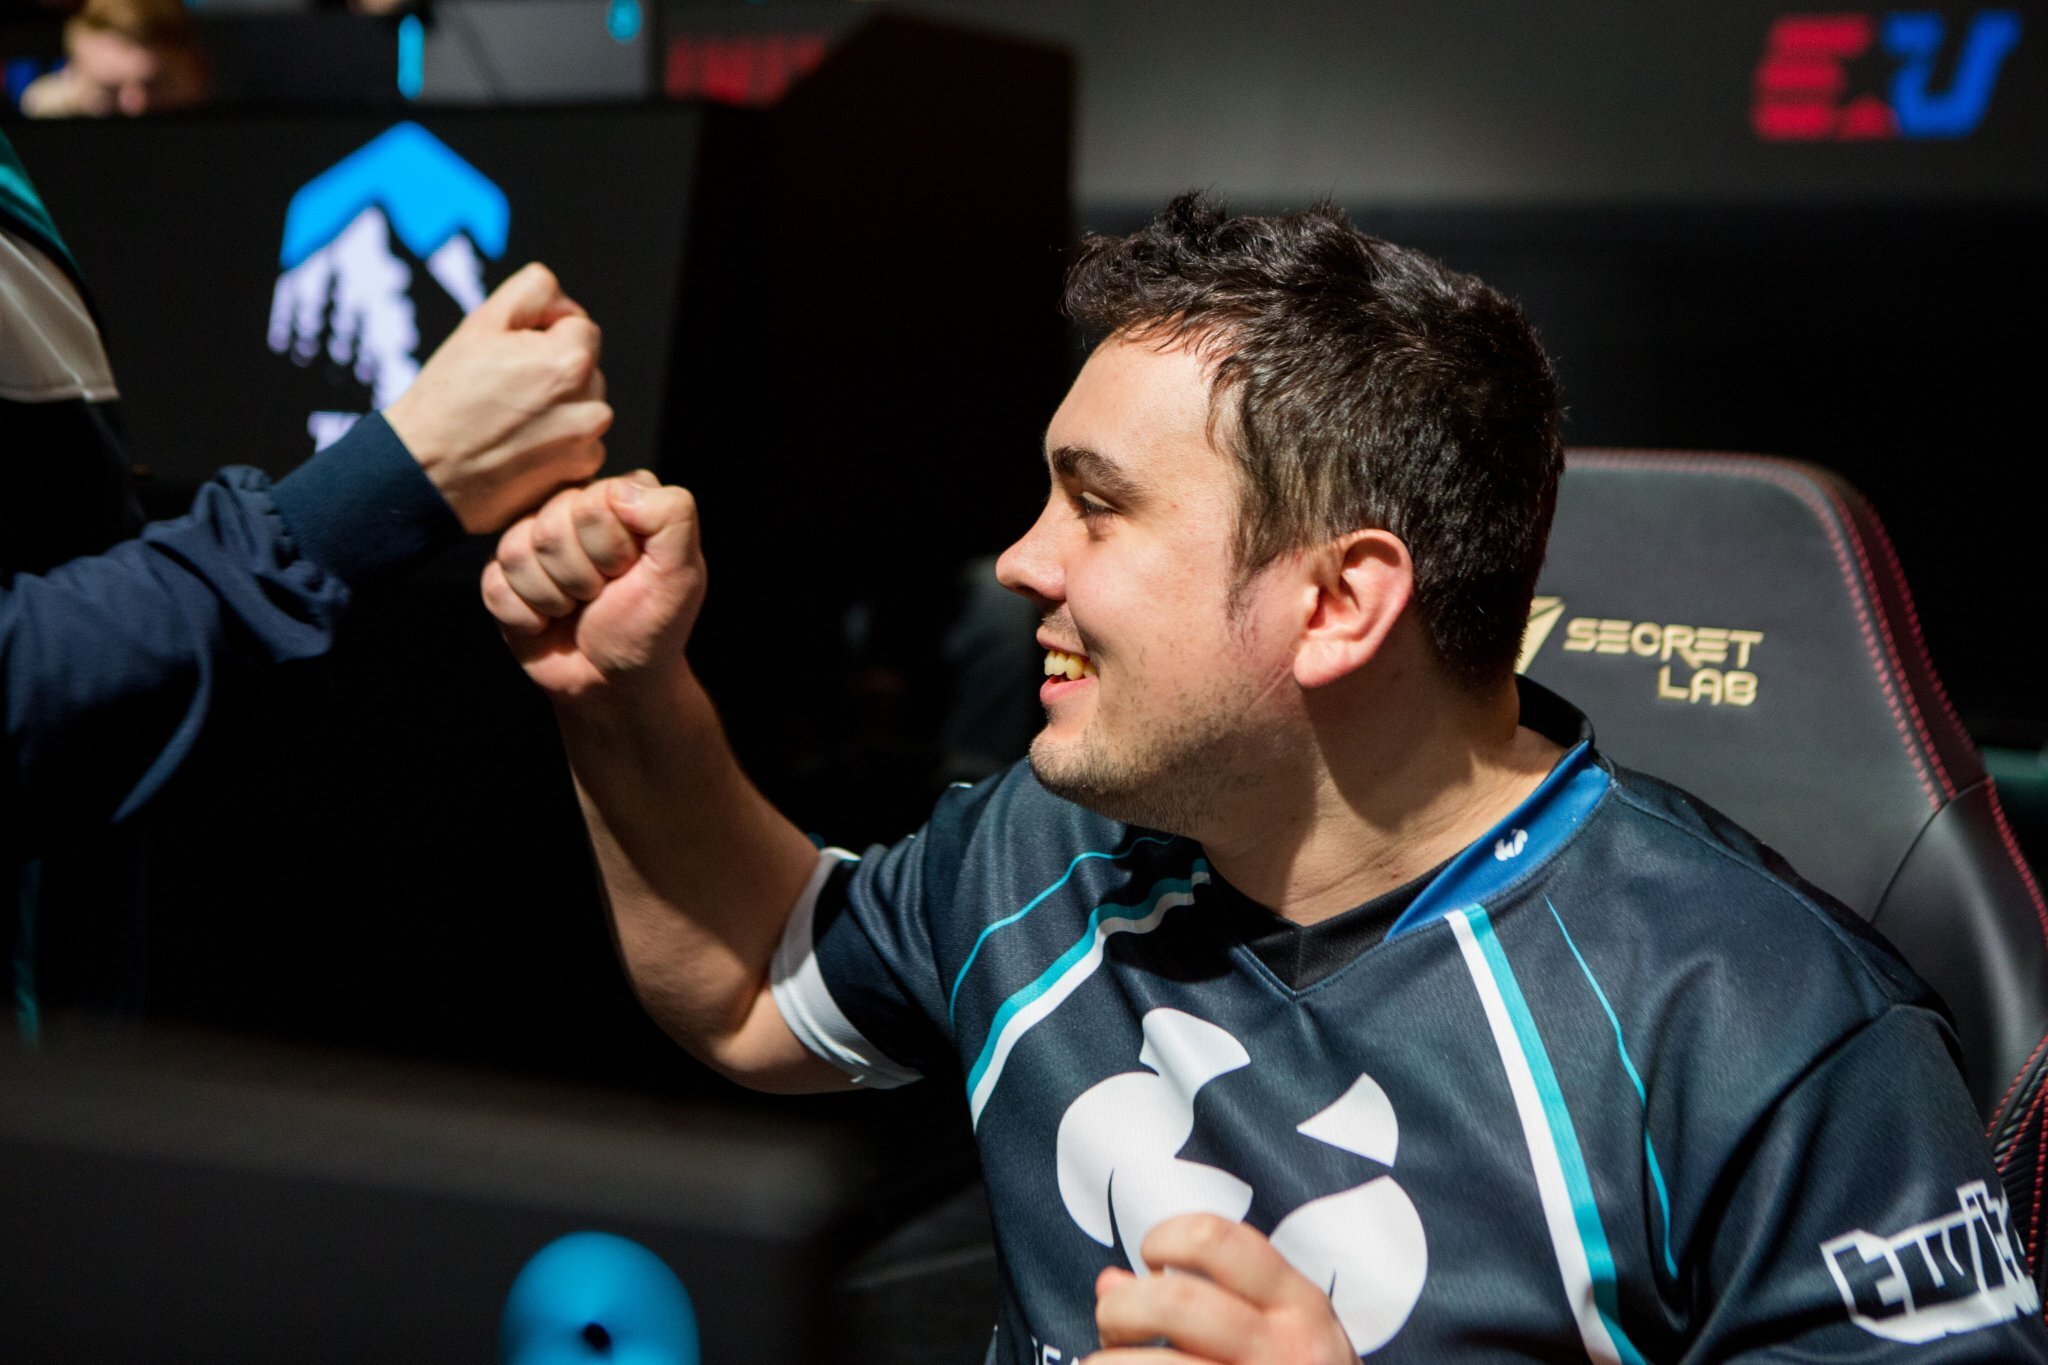 Tempo Storm have been dominant in 2019 thus far. From winning the preseason event, to leading the pack in the NPL, to winning the first NPL Royale.(Photo courtesy of NPL)